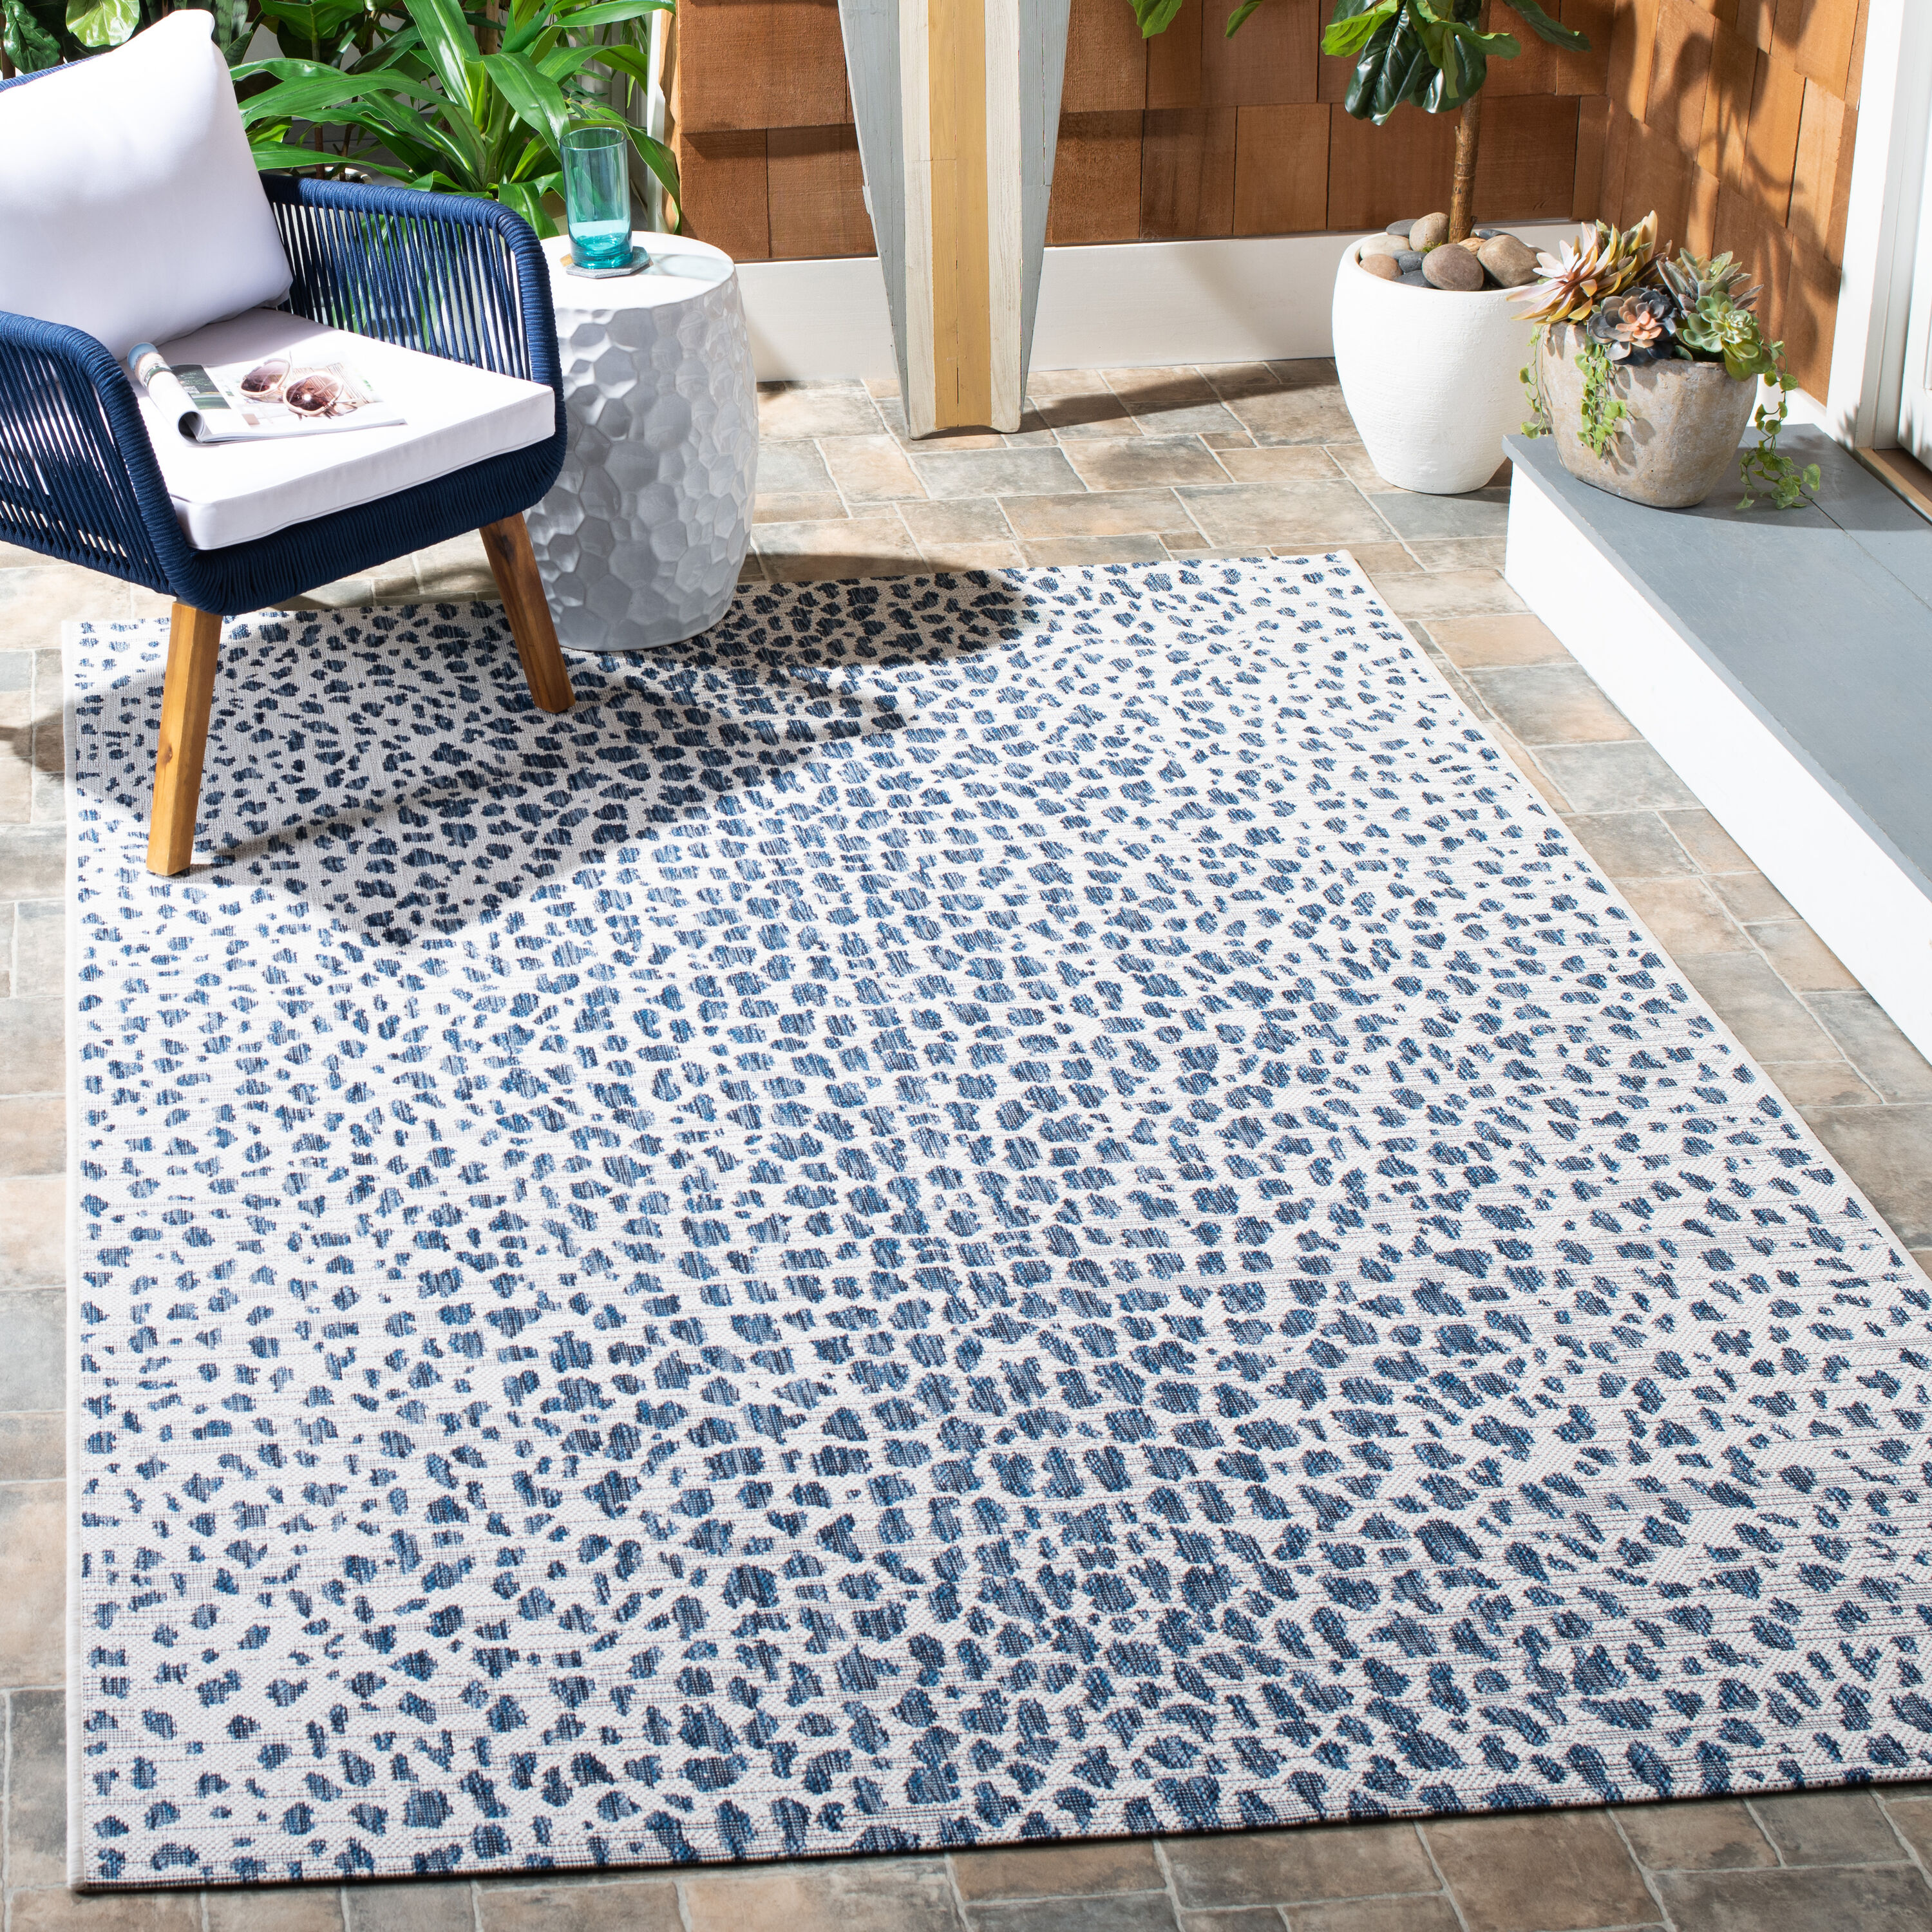 Safavieh Courtyard 5 X Ft Ivory Navy Square Indoor Outdoor Animal Print Area Rug In The Rugs Department At Lowes Com